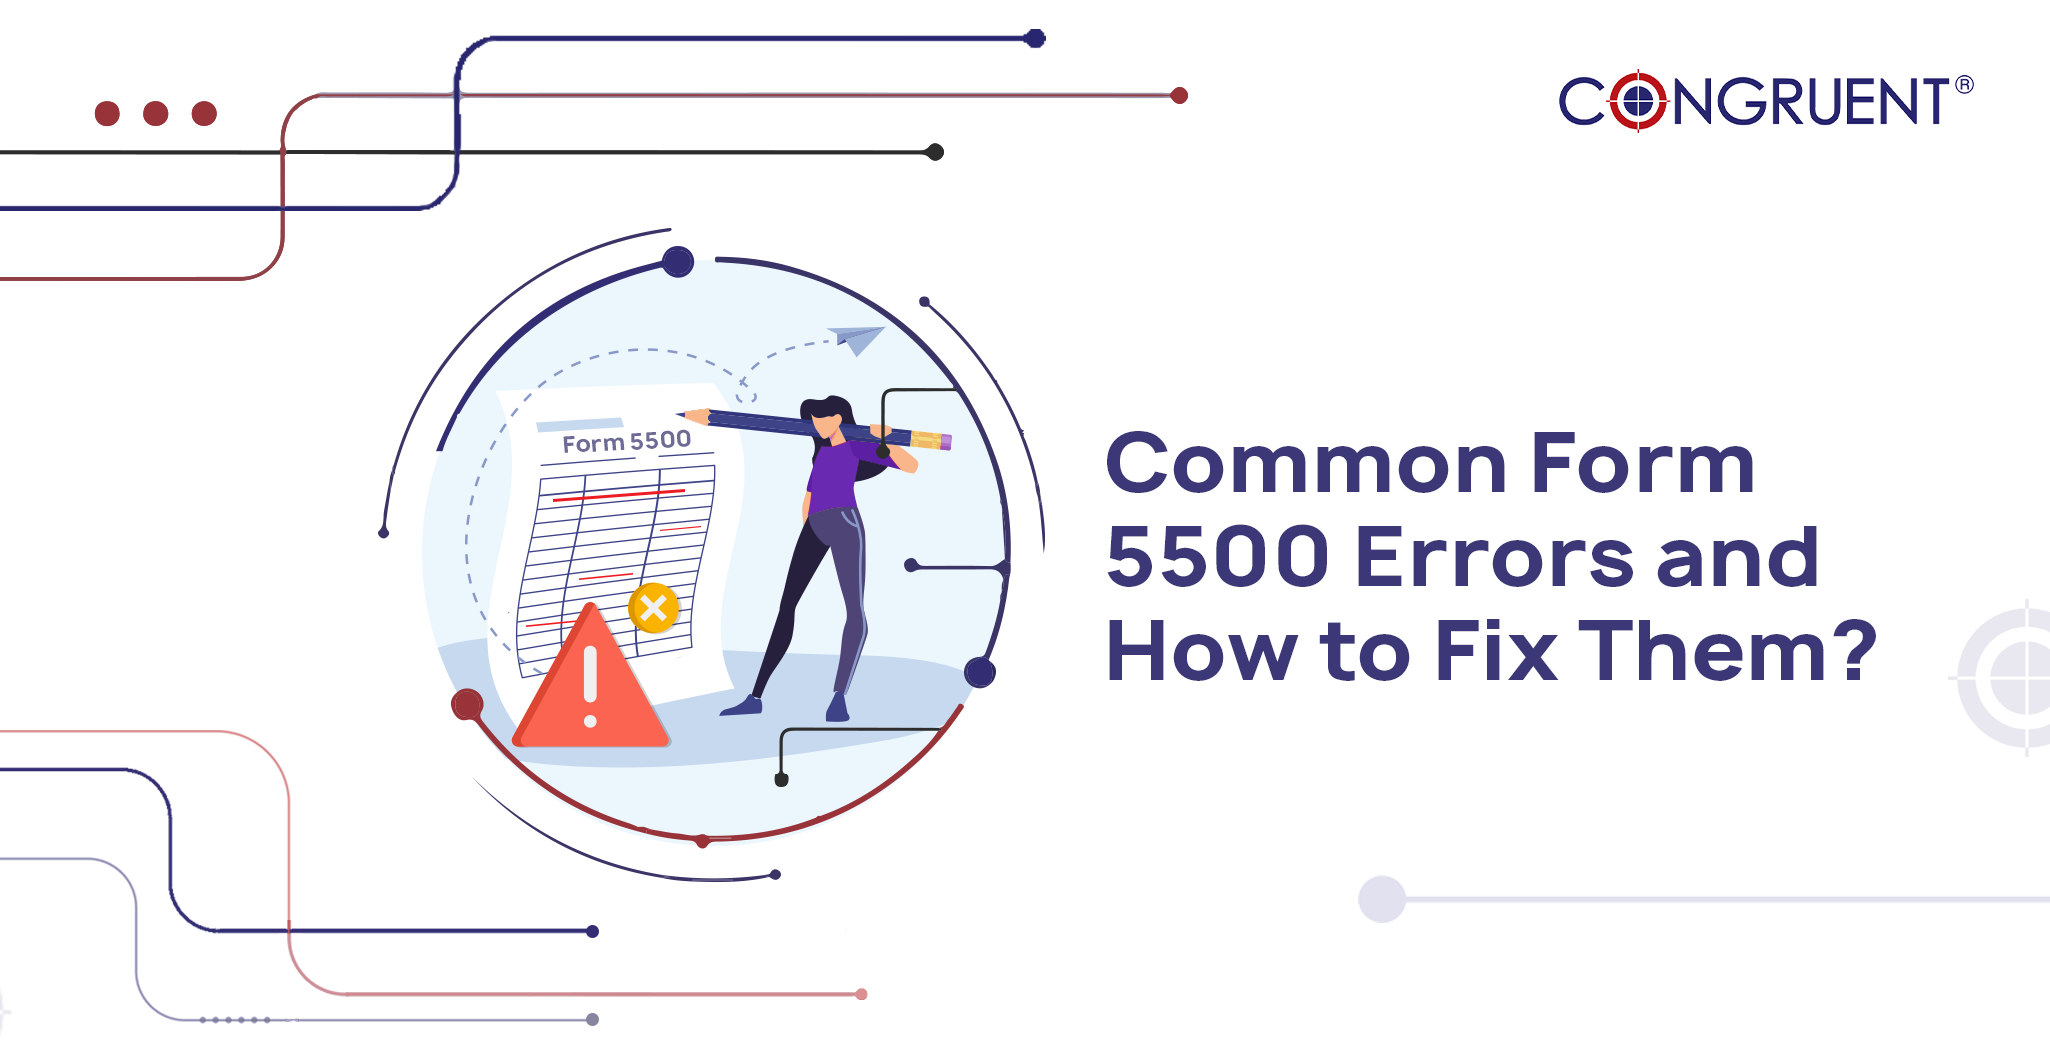 Common Form 5500 Errors and How to Fix Them?